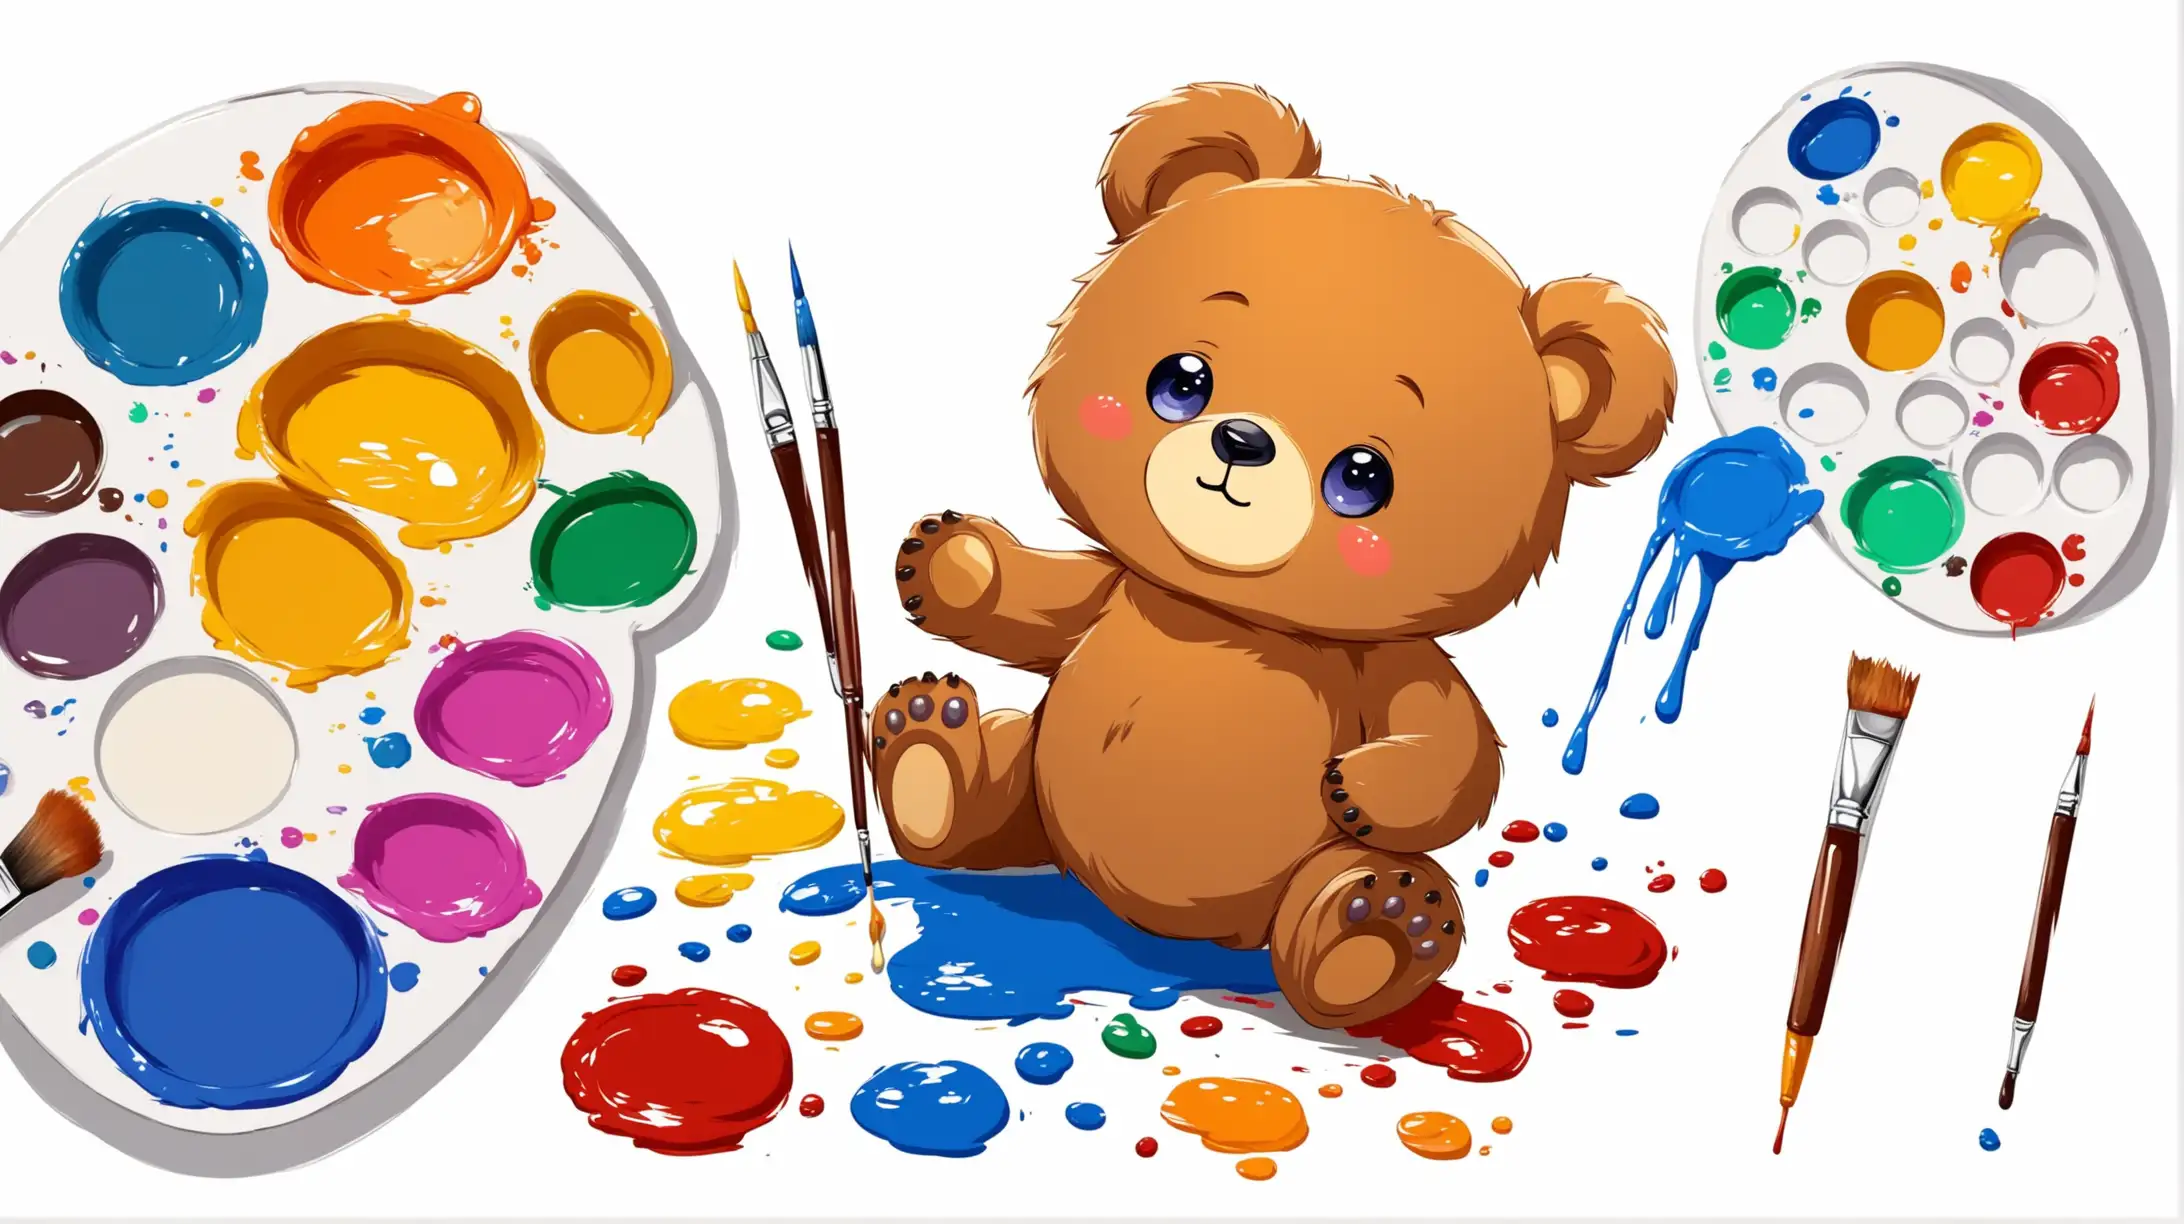 Adorable Cartoon Bear Painting with Messy White Background Palette